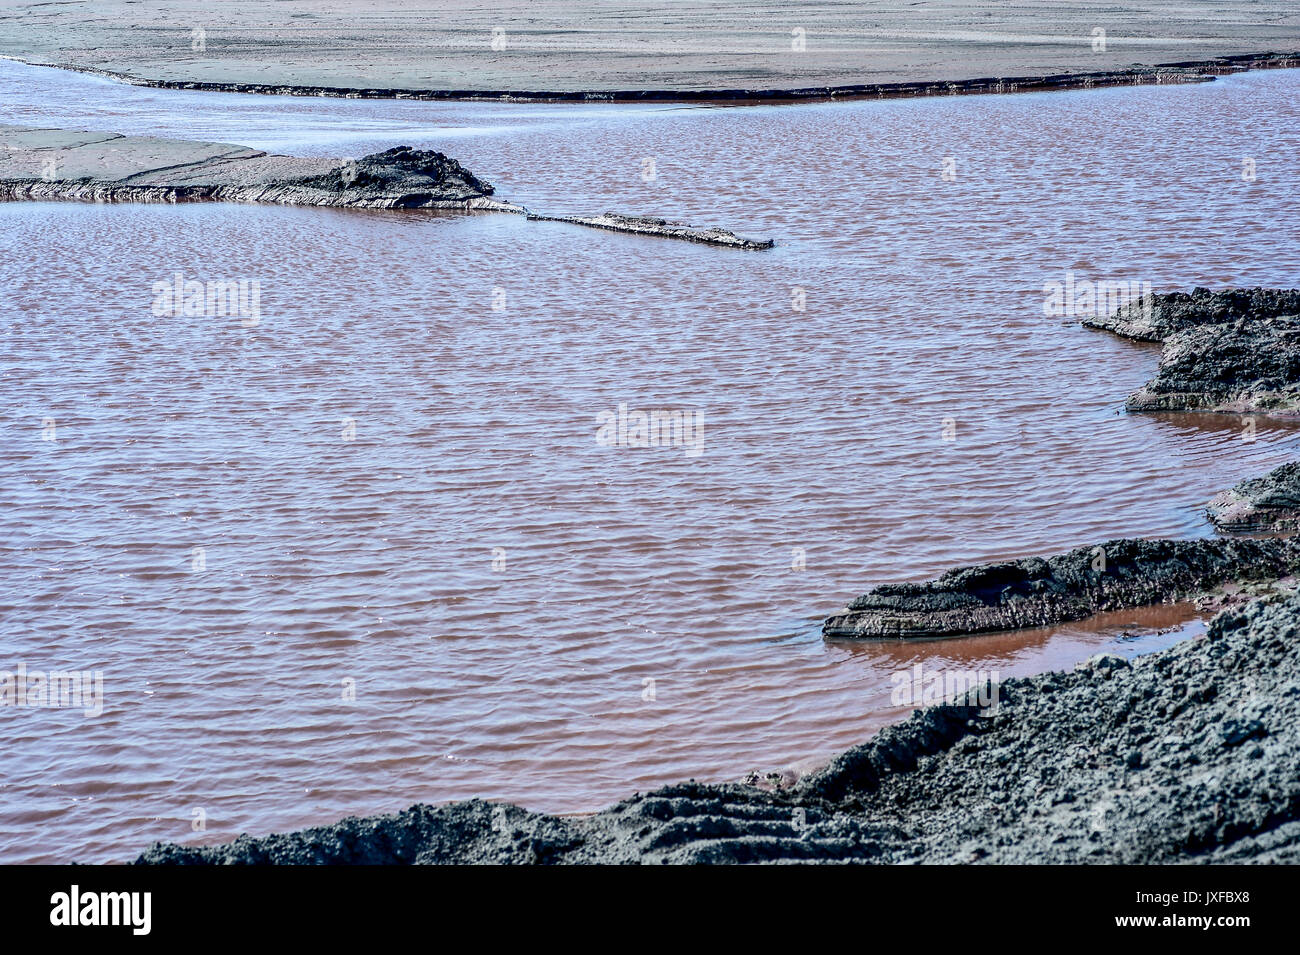 Production waste is accumulated in water. Stock Photo